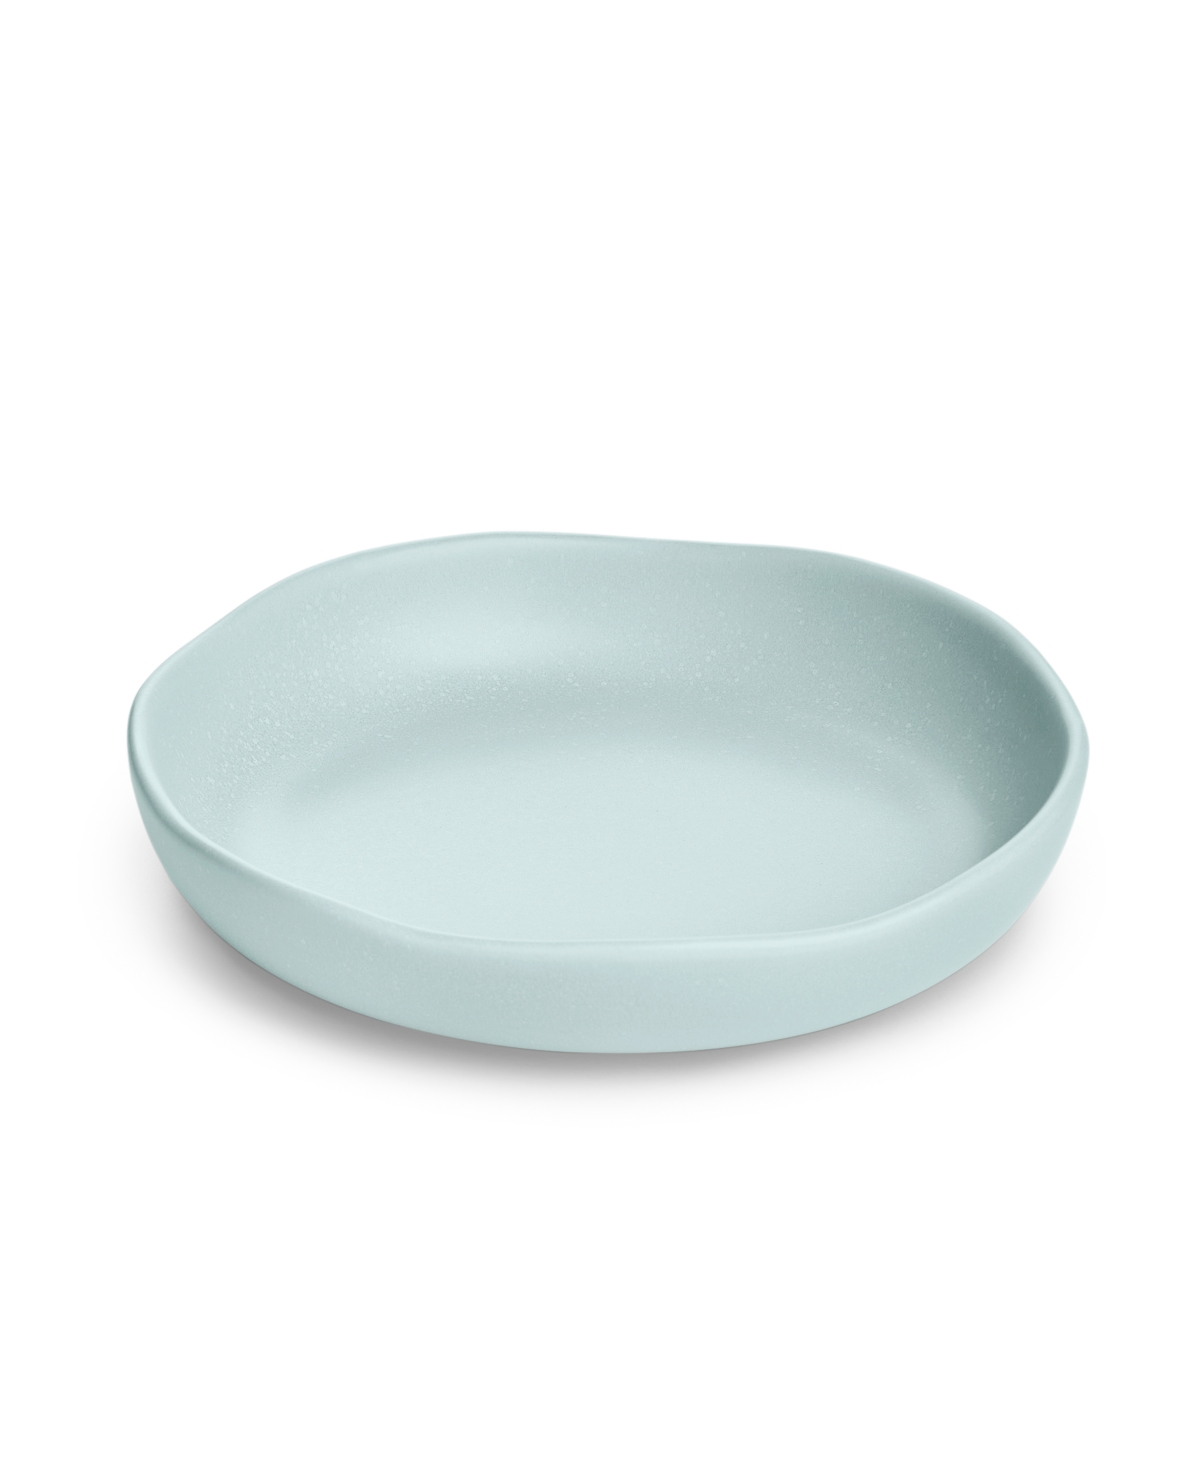 Blue Speckled Stoneware Dinner Bowl, Created for Macy's - Blue